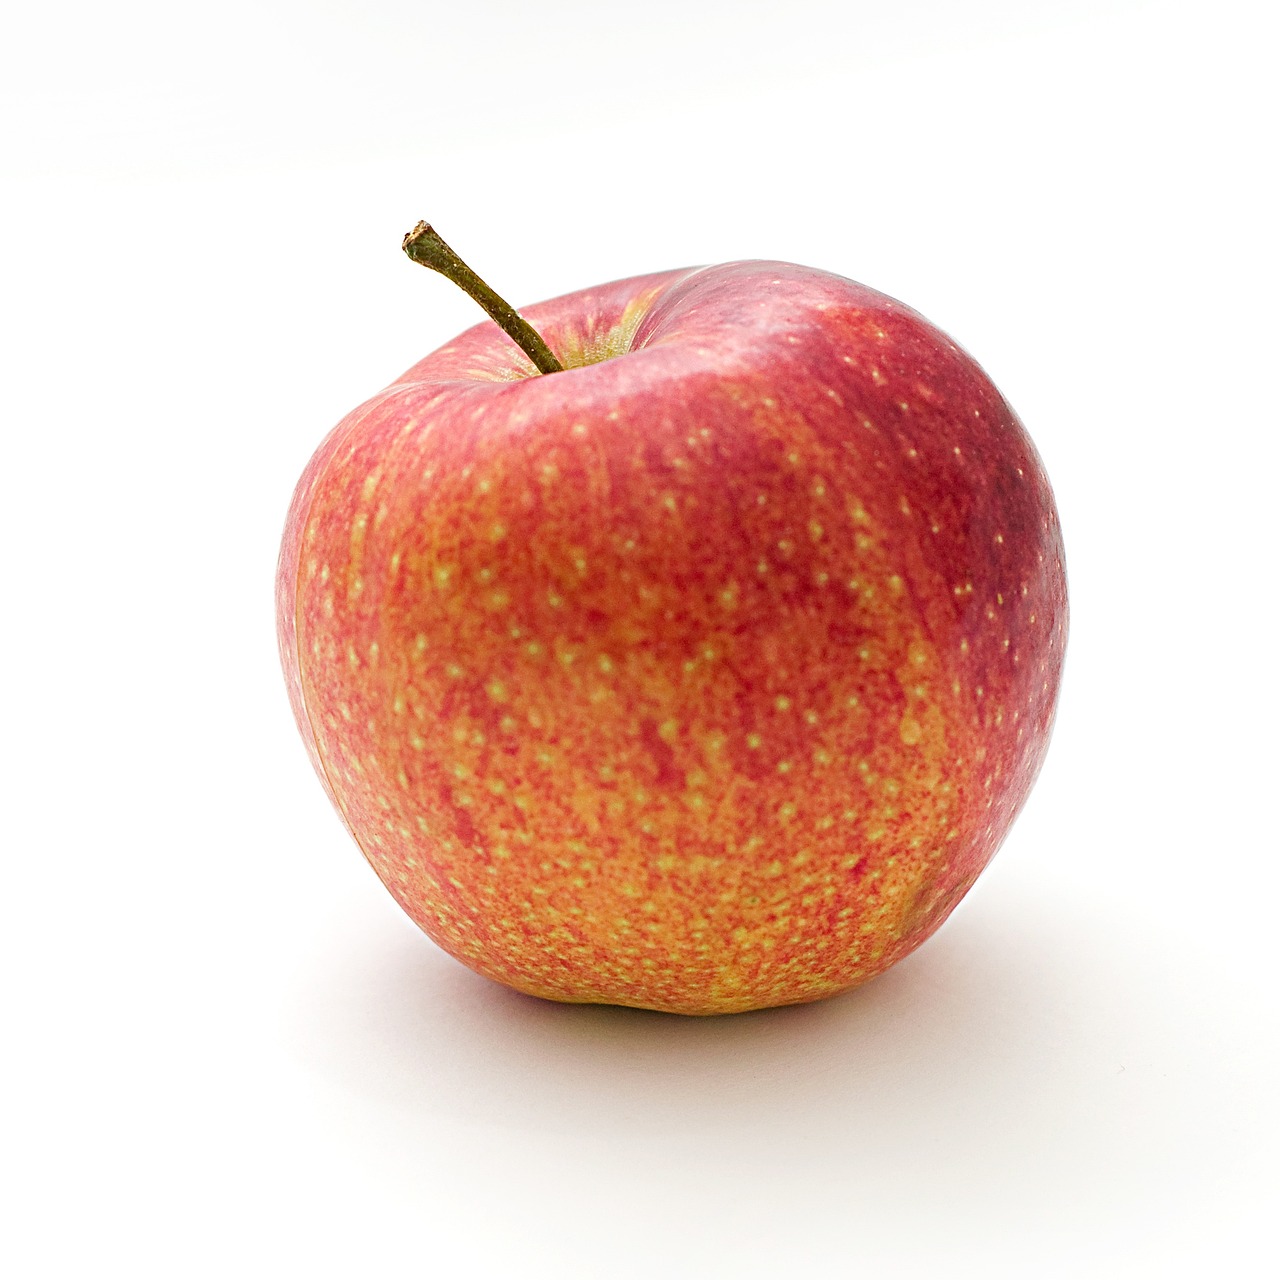 a red apple sitting on top of a white surface, renaissance, istockphoto, abundant detail, full color, vga